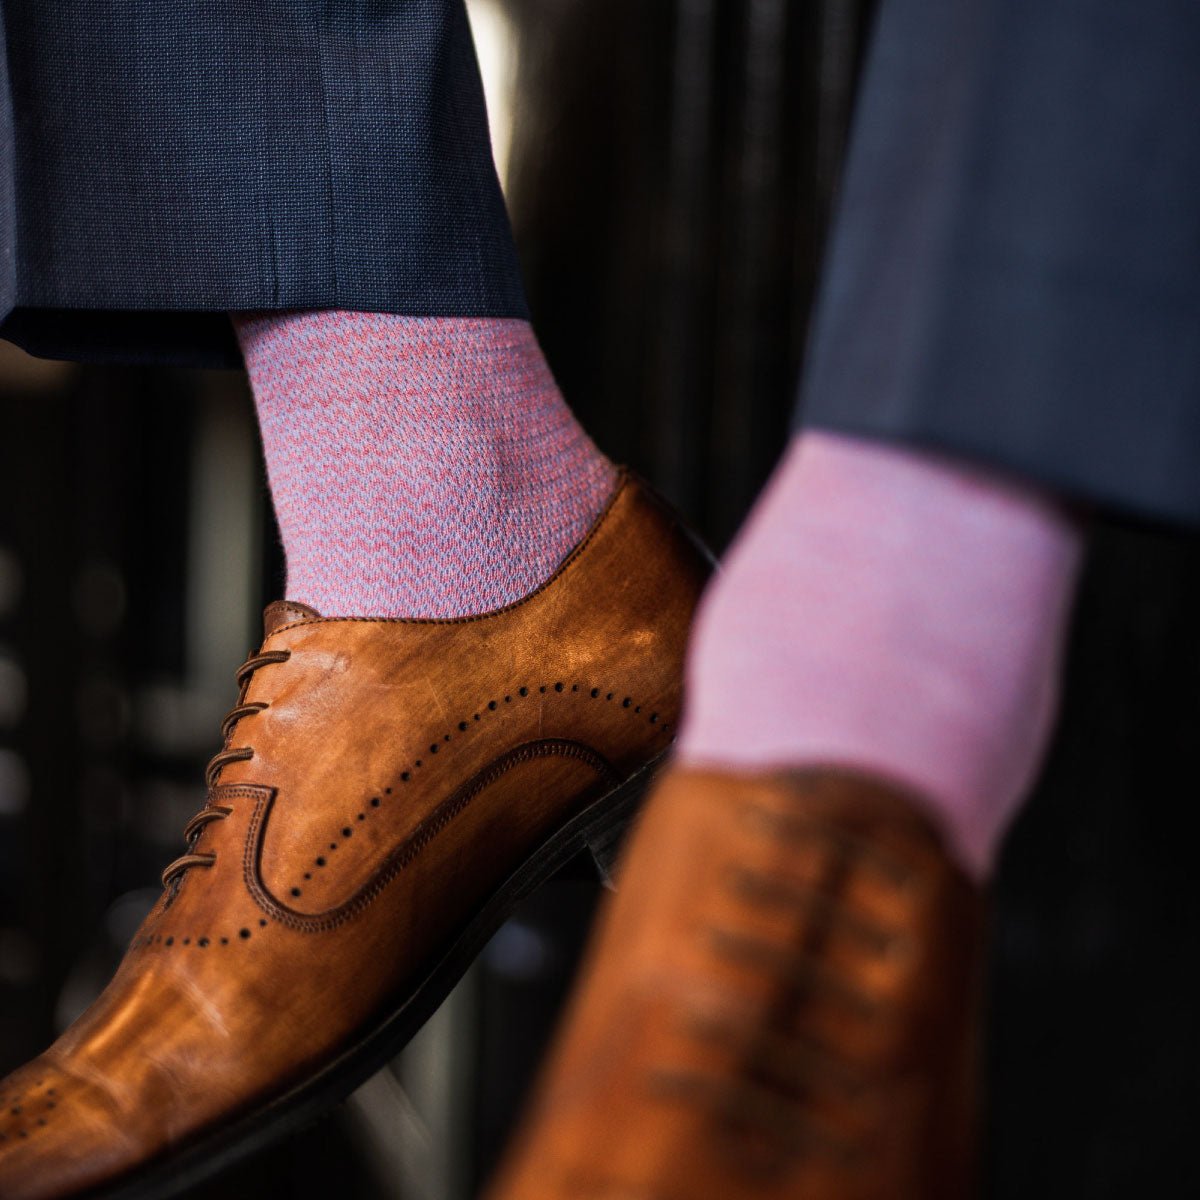 A man wearing blue trousers, pink and blue socks, and tan dress shoes.